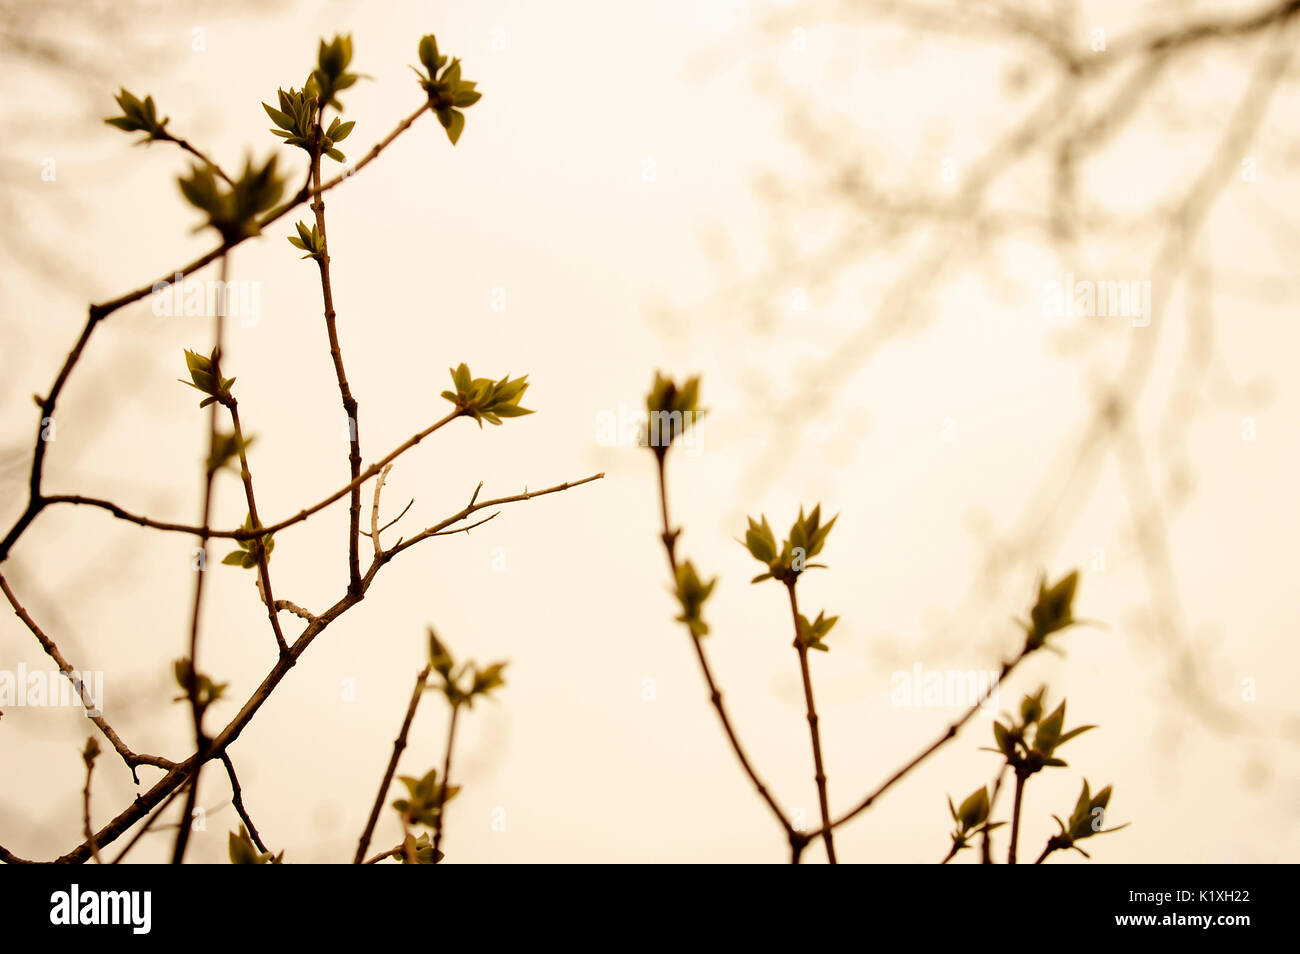 Budding branches against a warm sky. Stock Photo